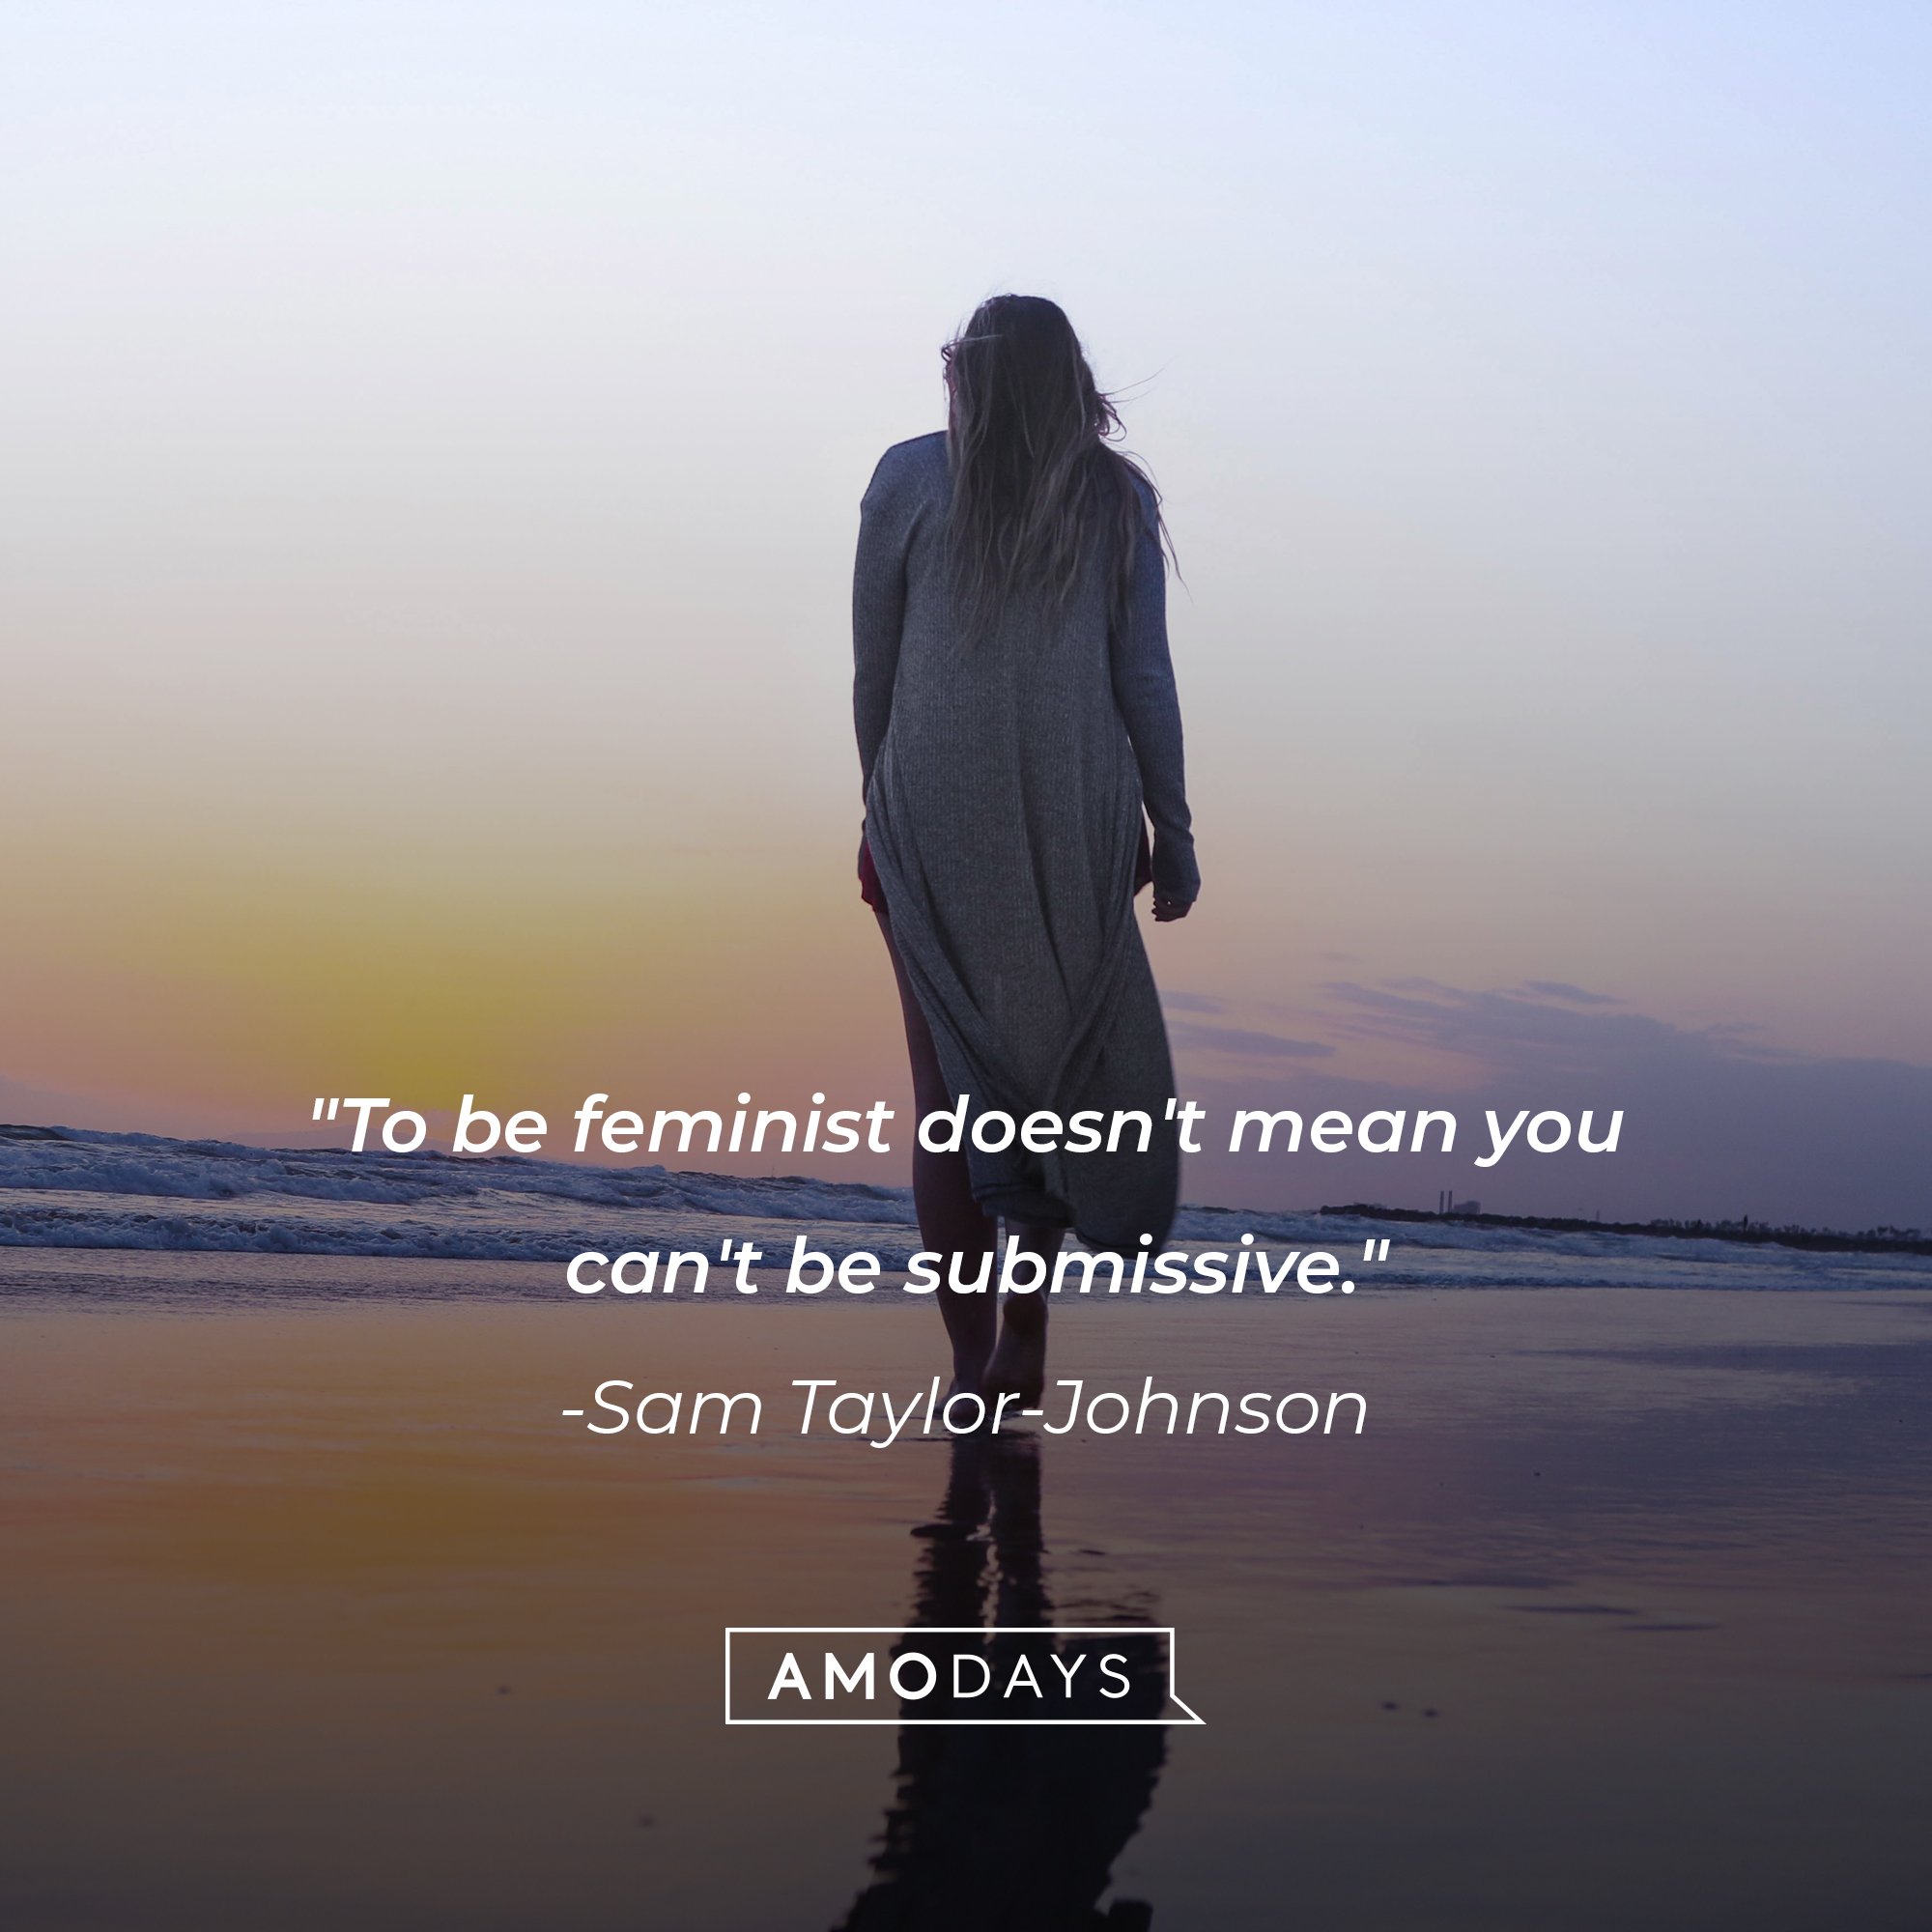  Sam Taylor-Johnson’s quote: "To be feminist doesn't mean you can't be submissive." | Image: AmoDays